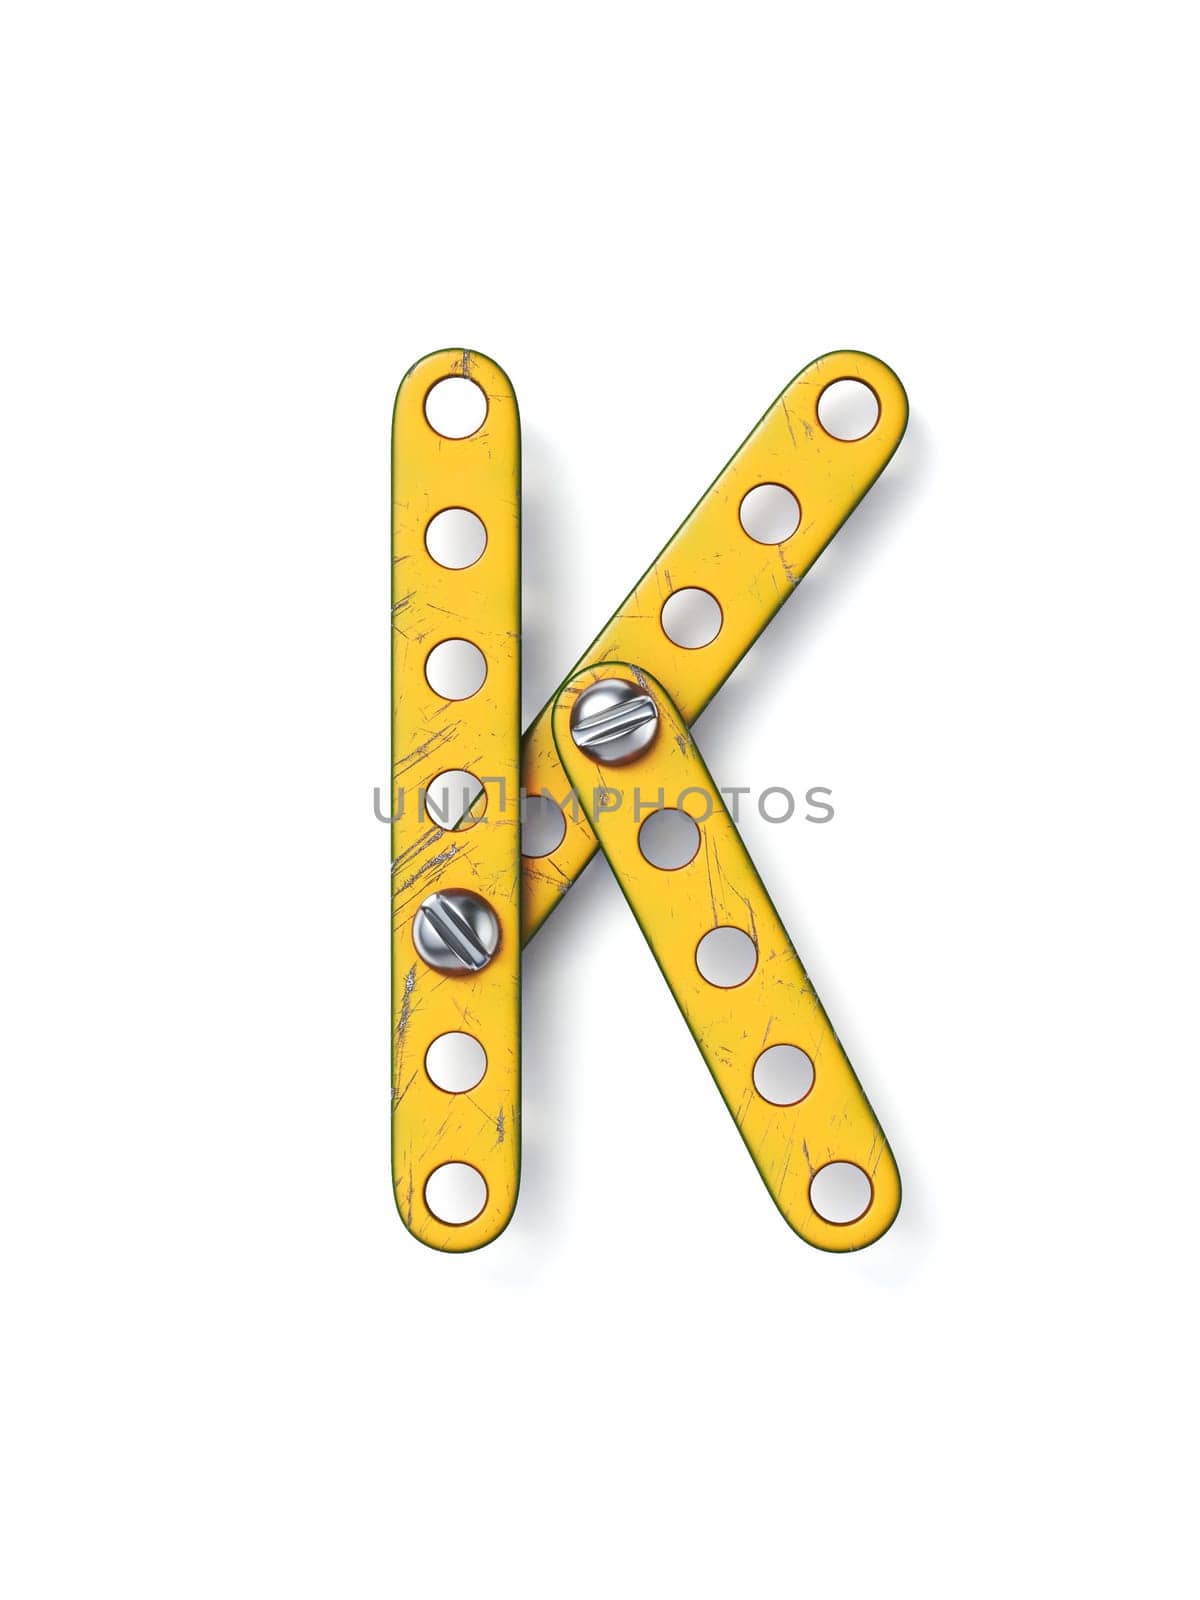 Aged yellow constructor font Letter K 3D by djmilic